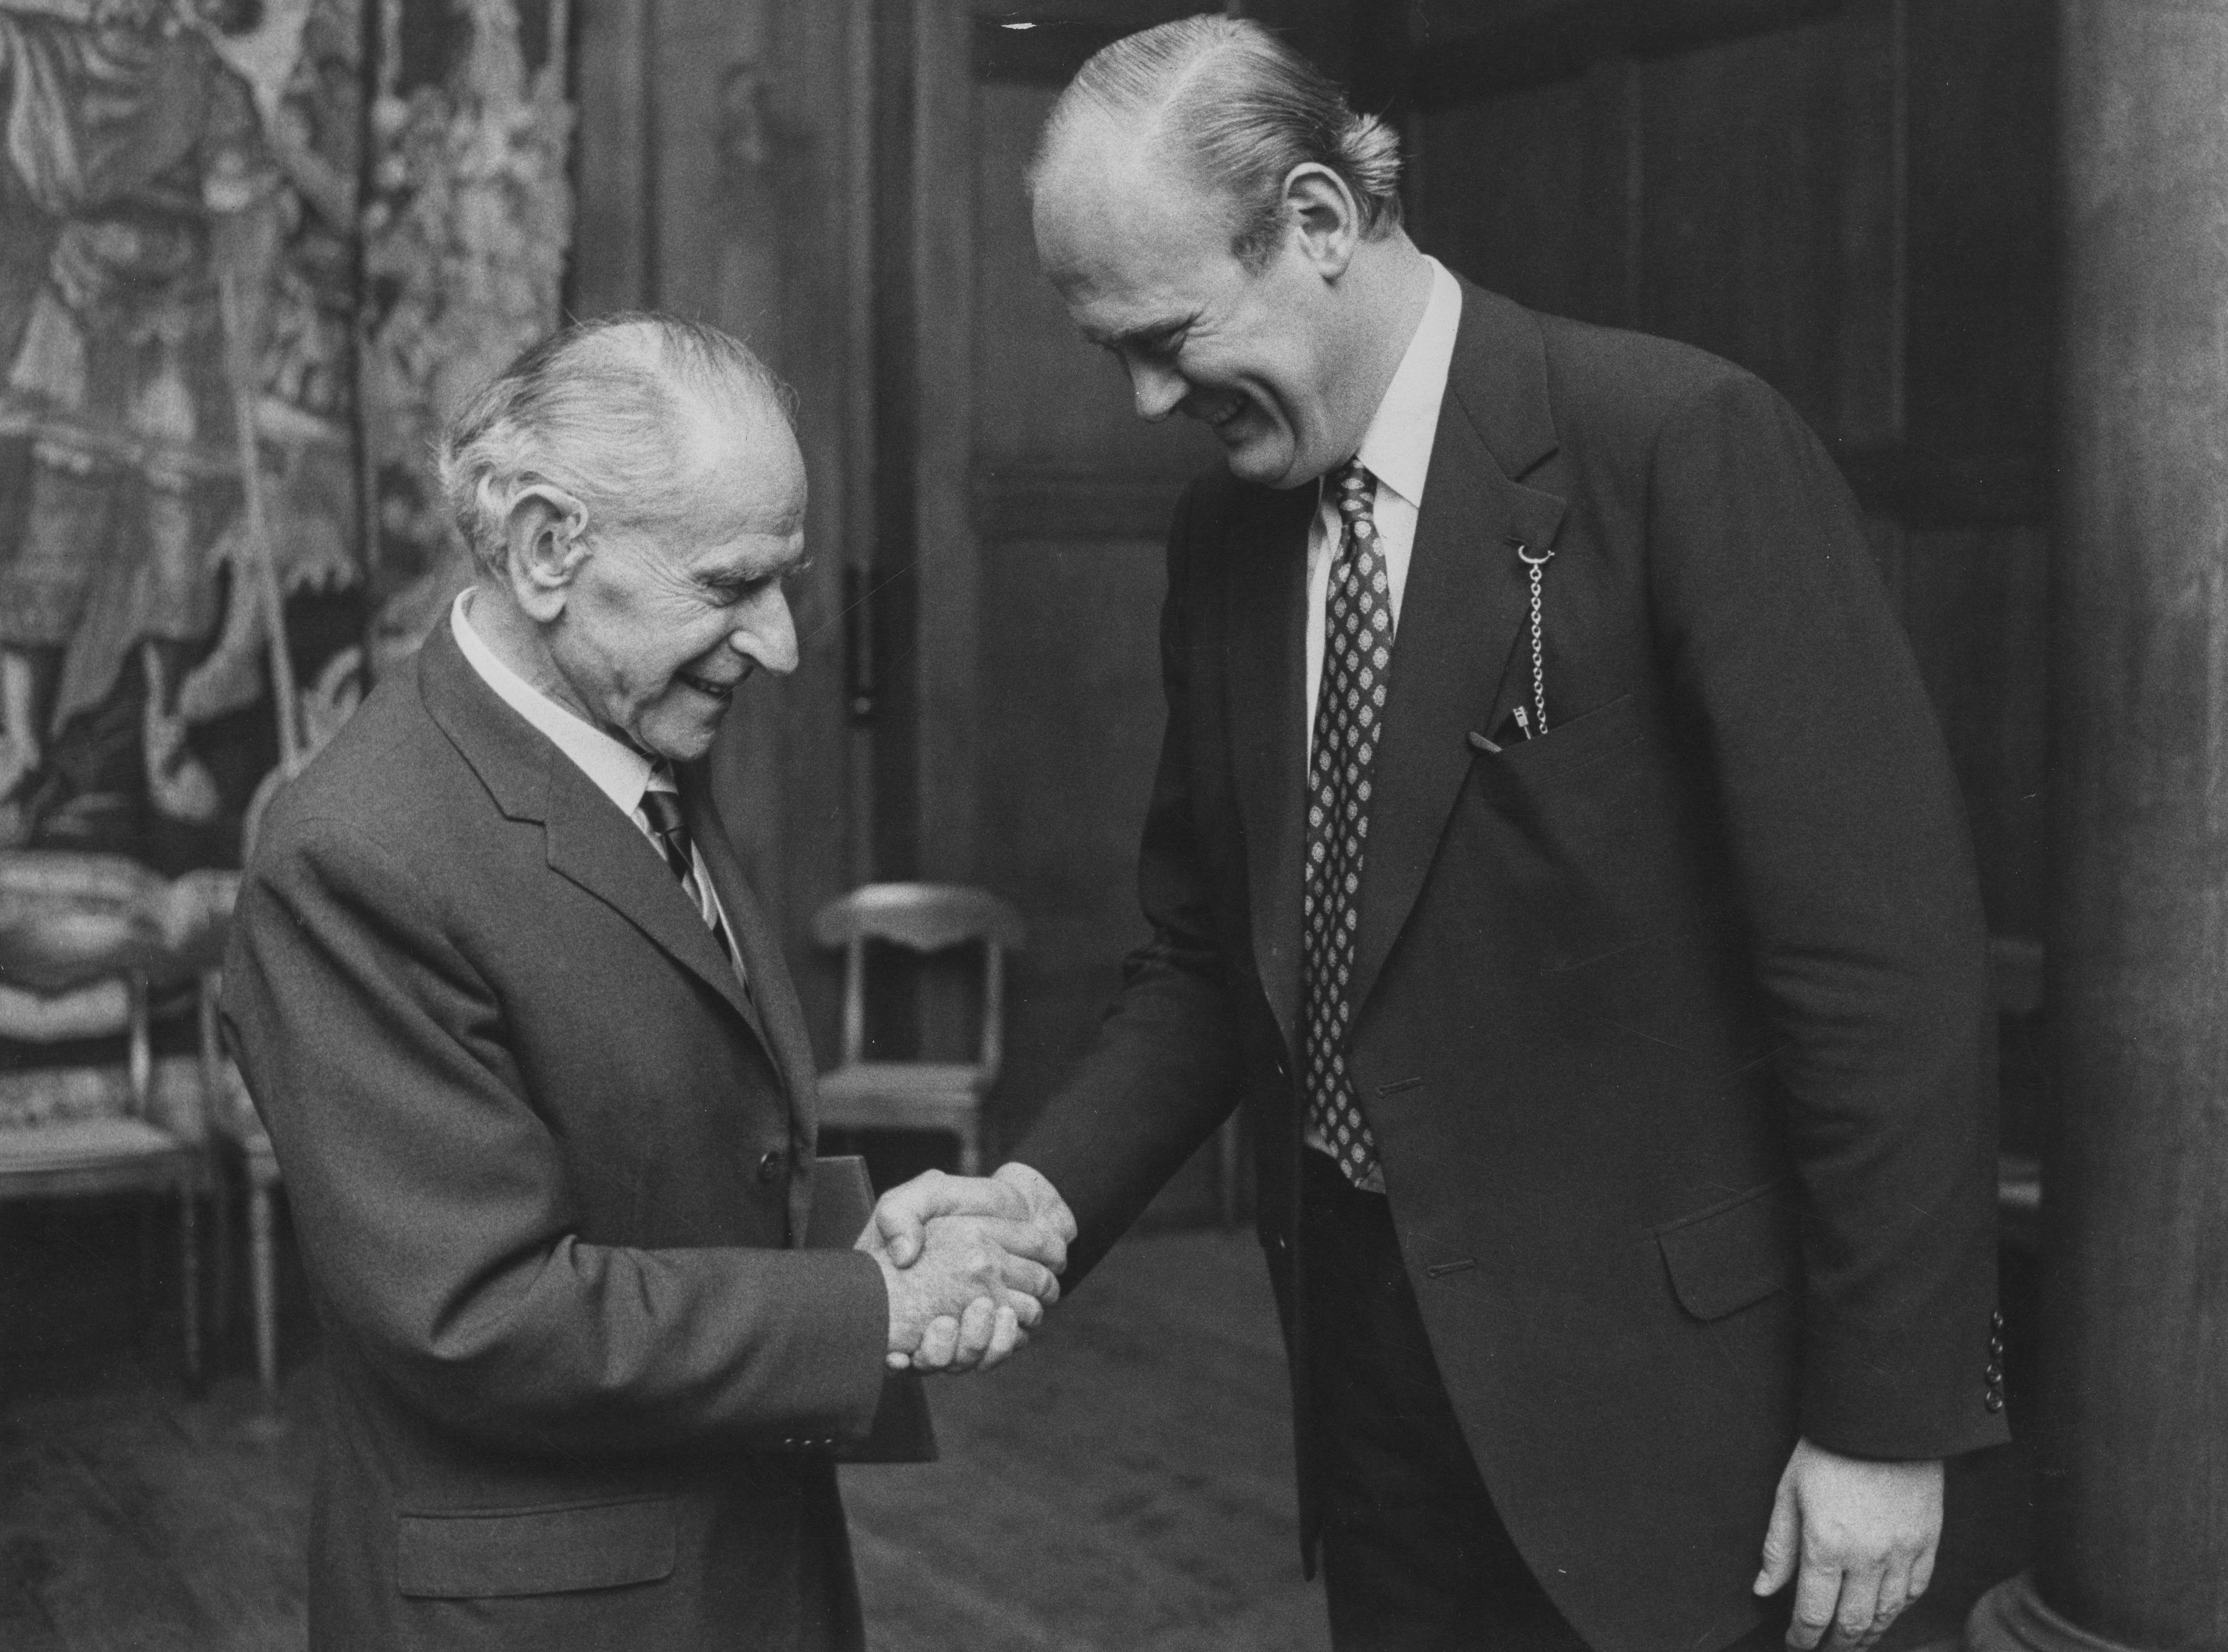 Philosopher Sir Karl Popper (left) being presented with the Sonning Prize